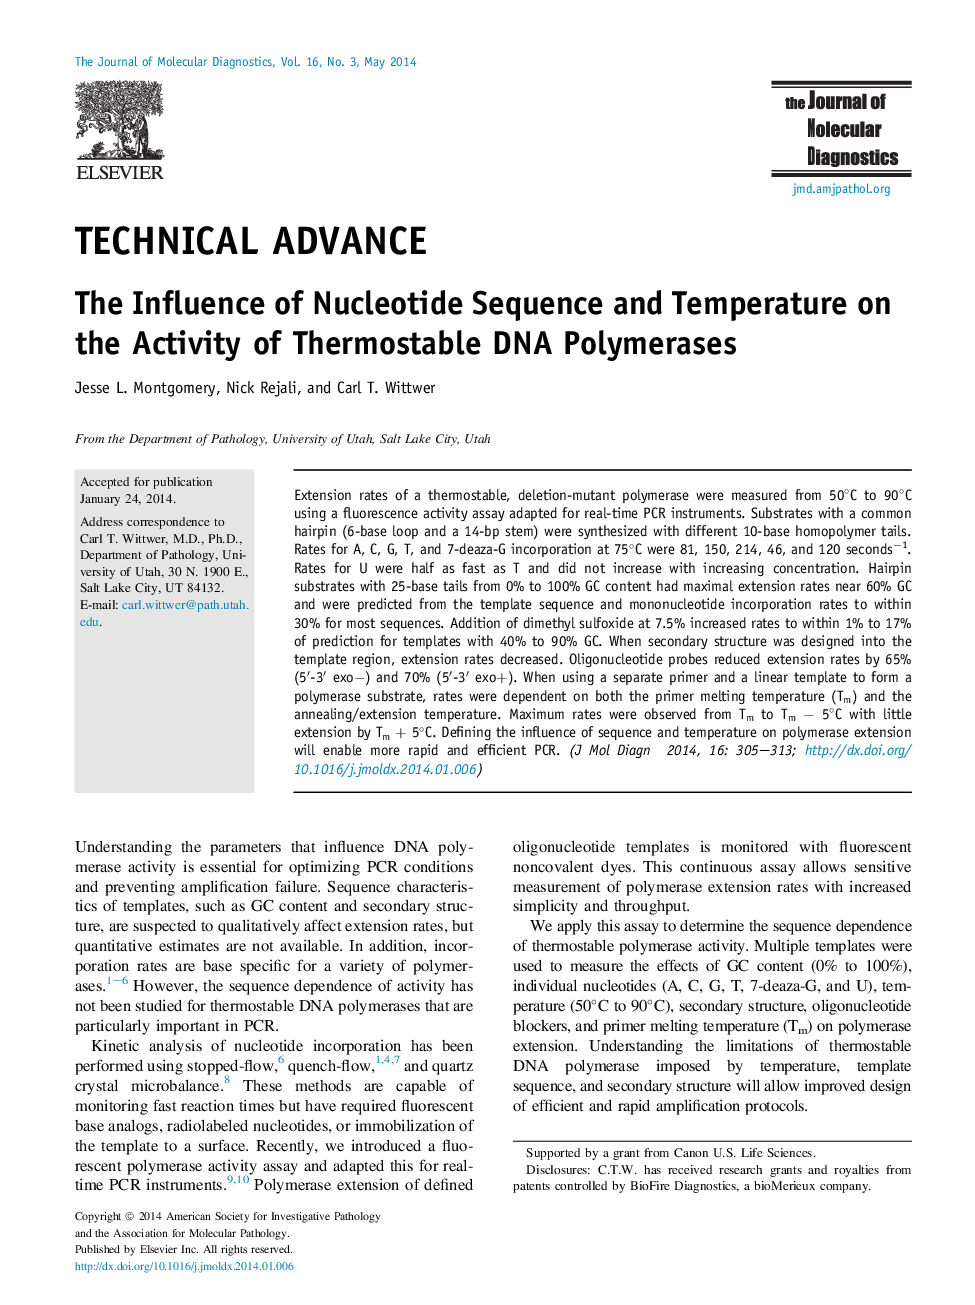 Technical advanceThe Influence of Nucleotide Sequence and Temperature on the Activity of Thermostable DNA Polymerases